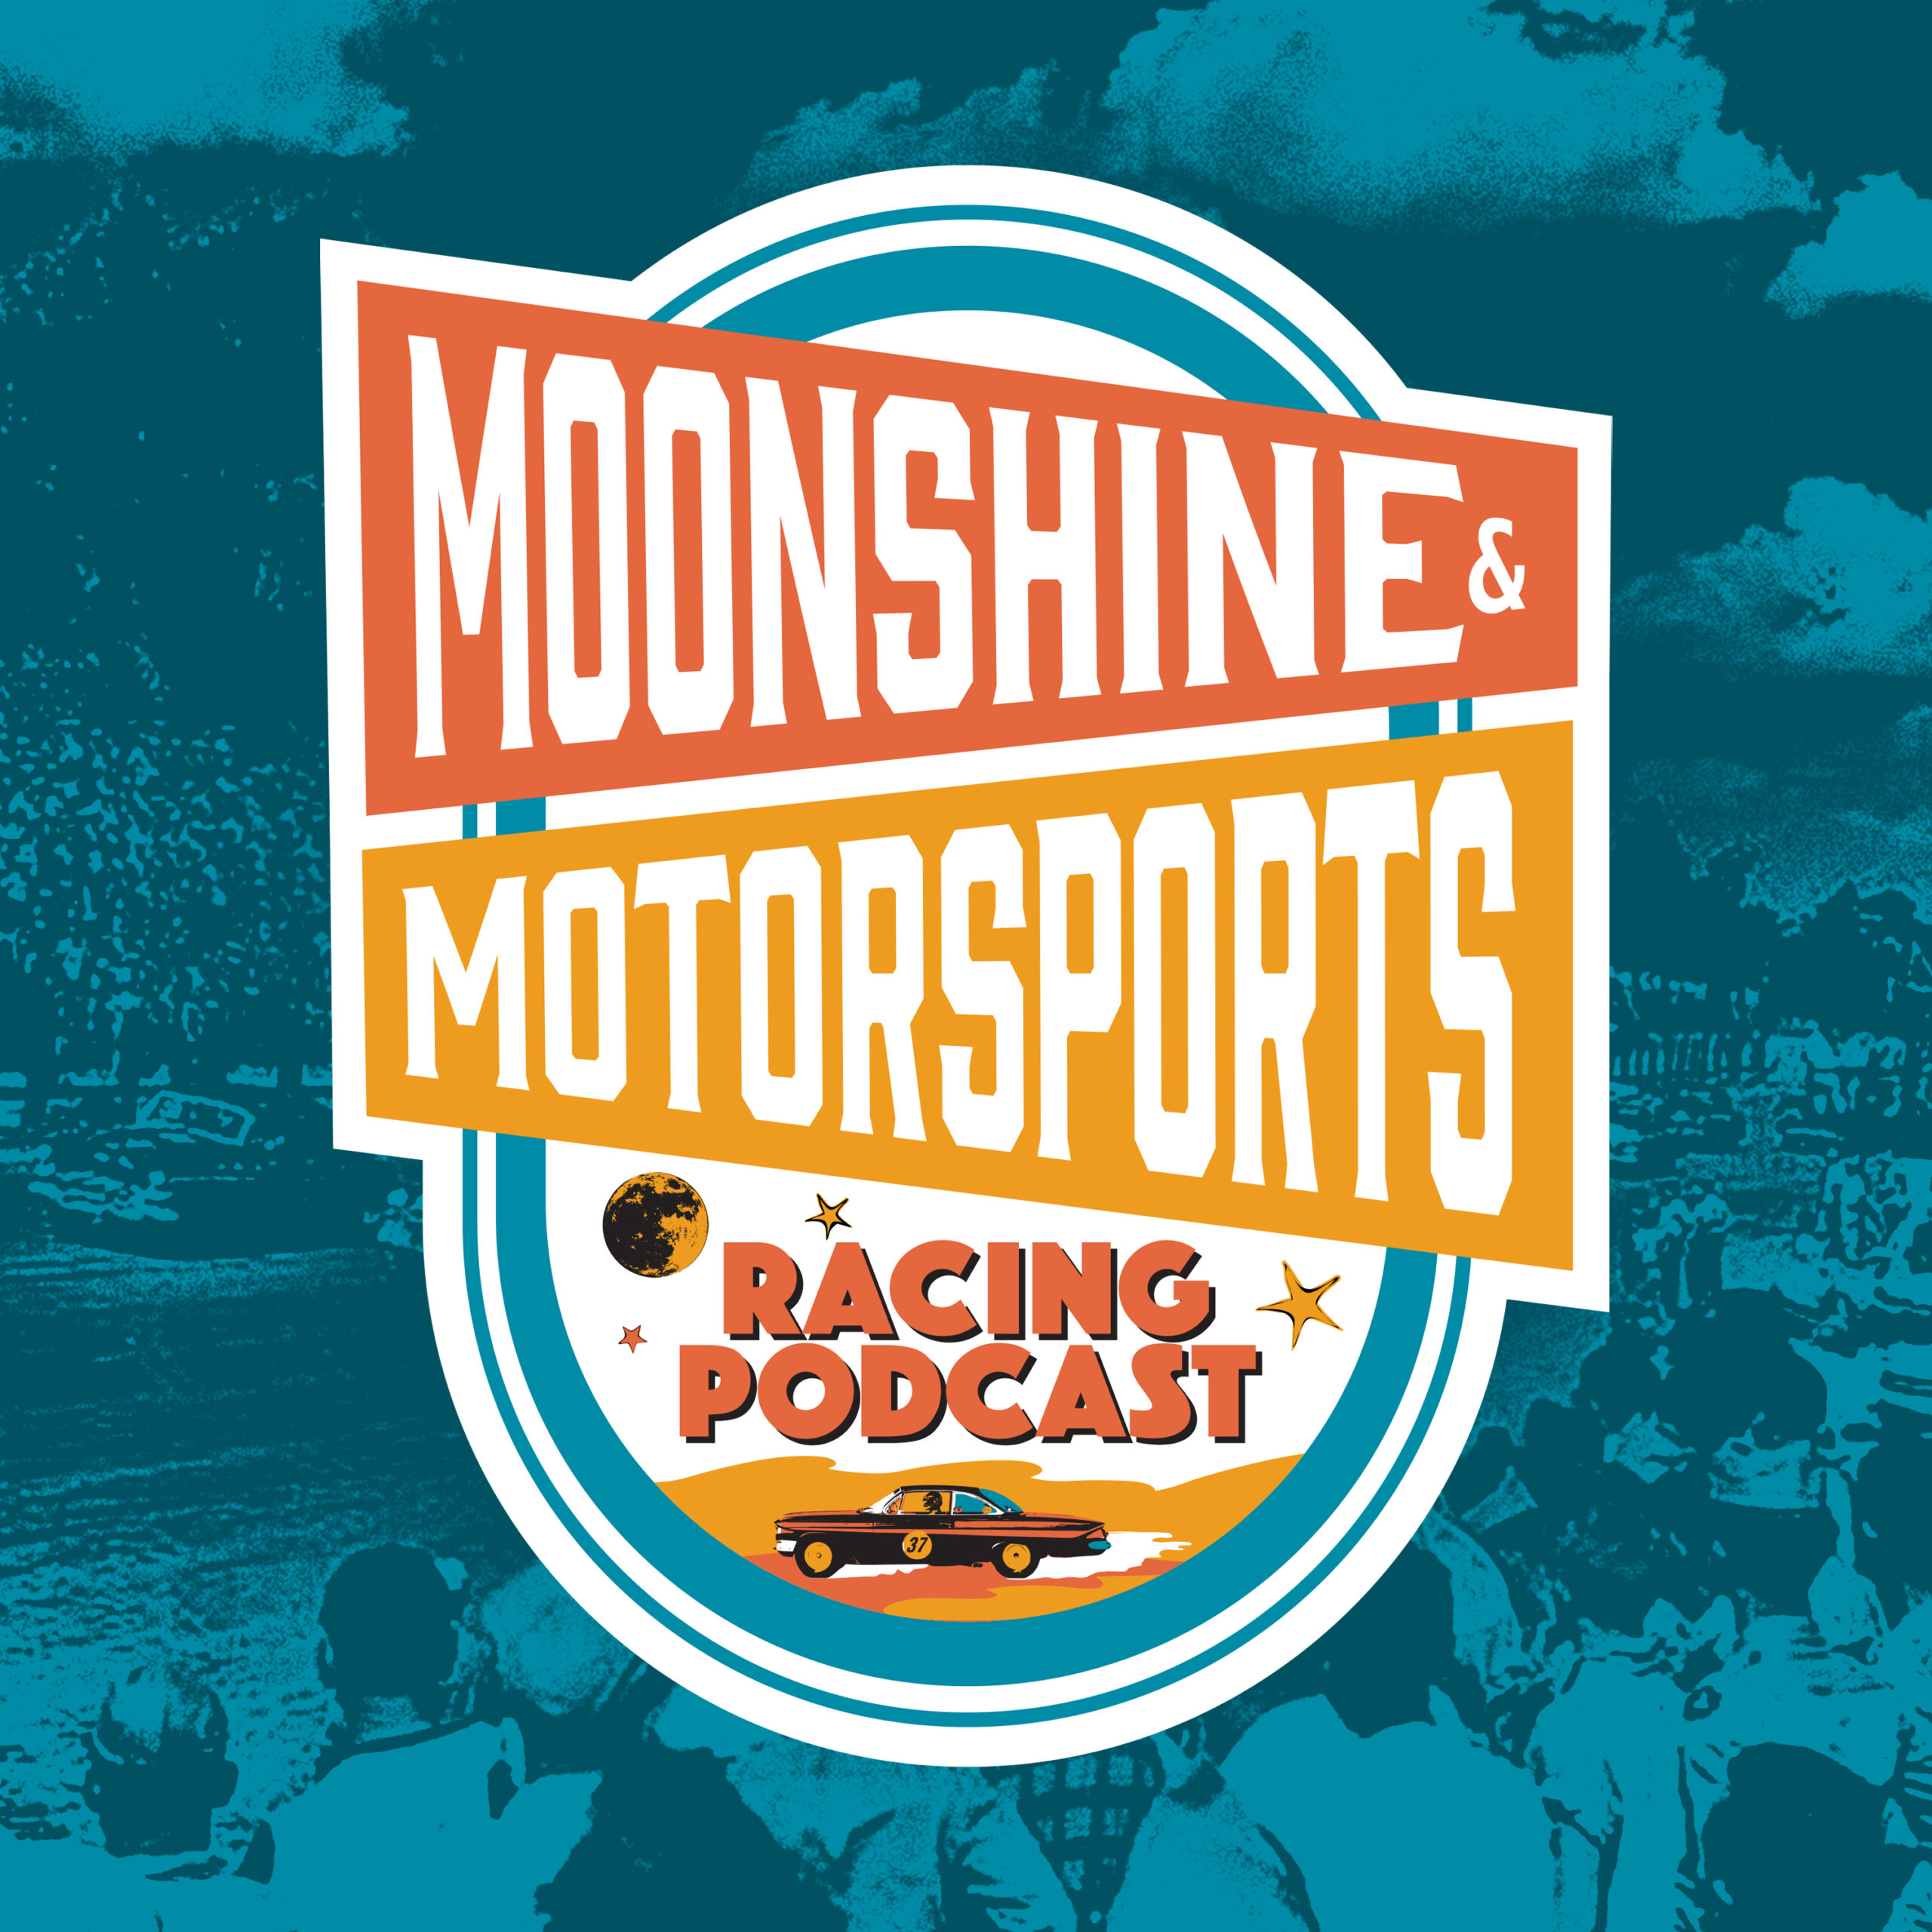 Moonshine and Motorsports Racing Podcast